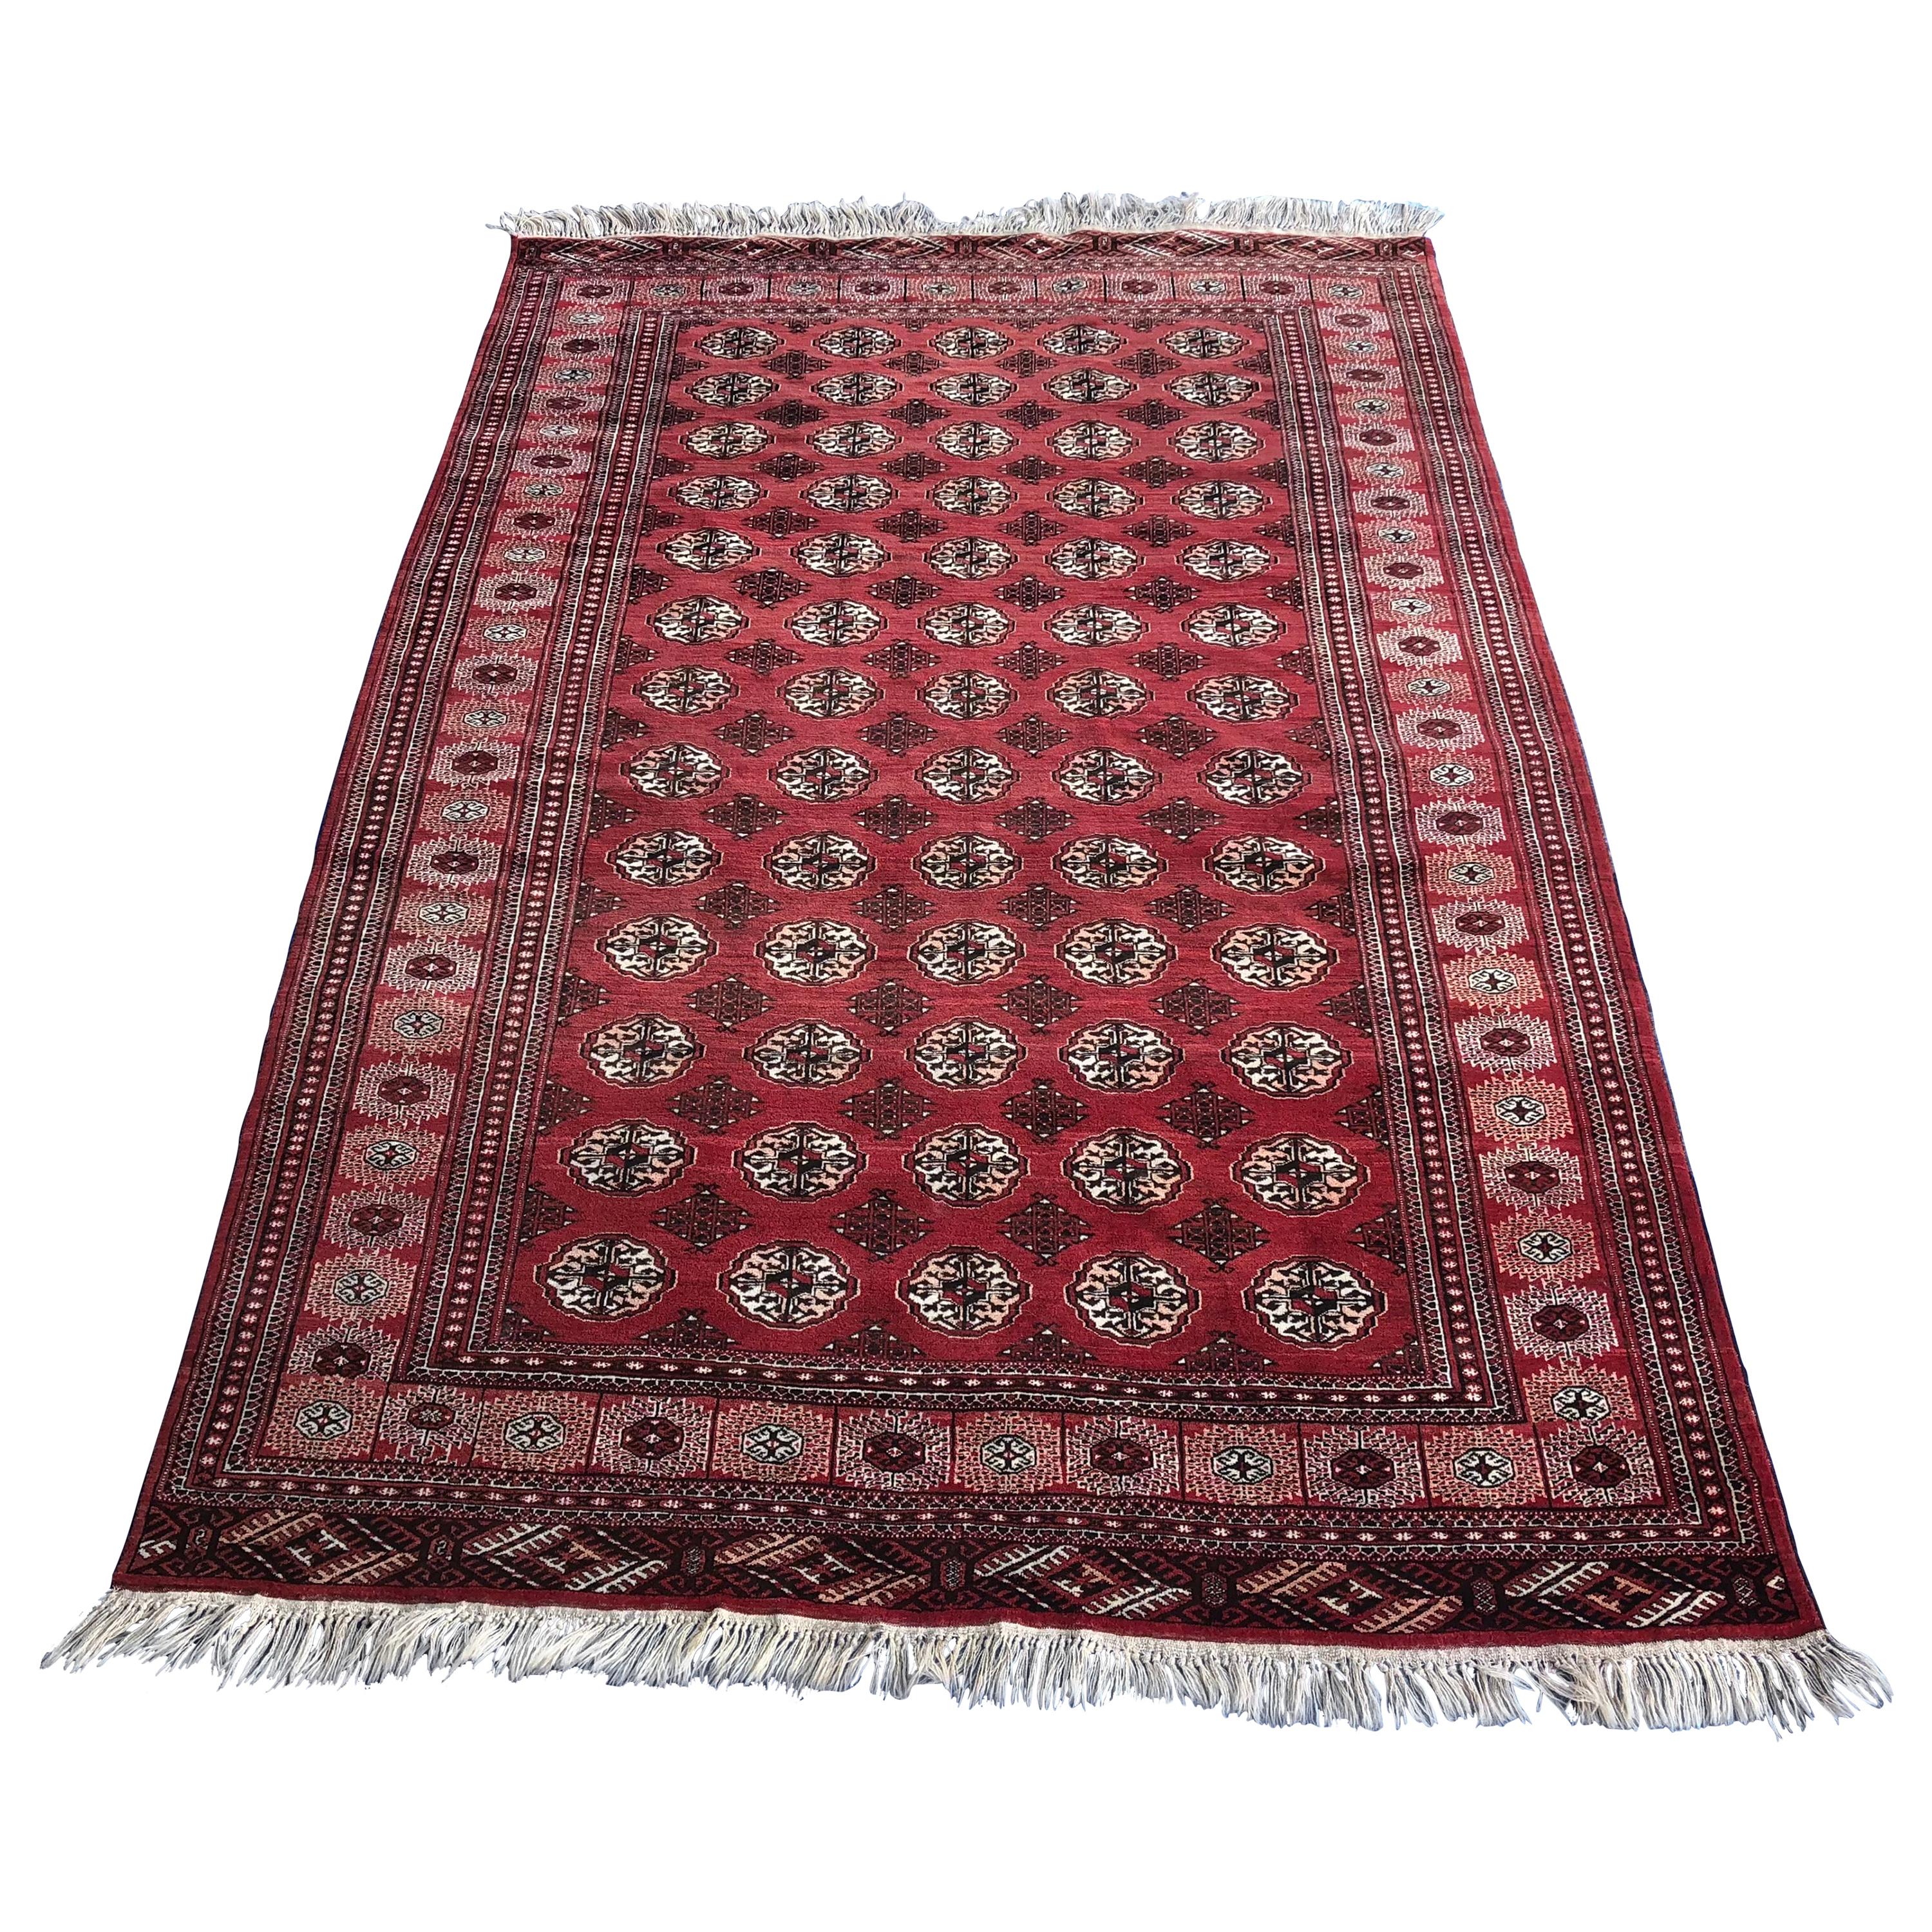 Antique Red Afghan Ersari Hand Knotted Turkoman Rug, circa 1920 For Sale